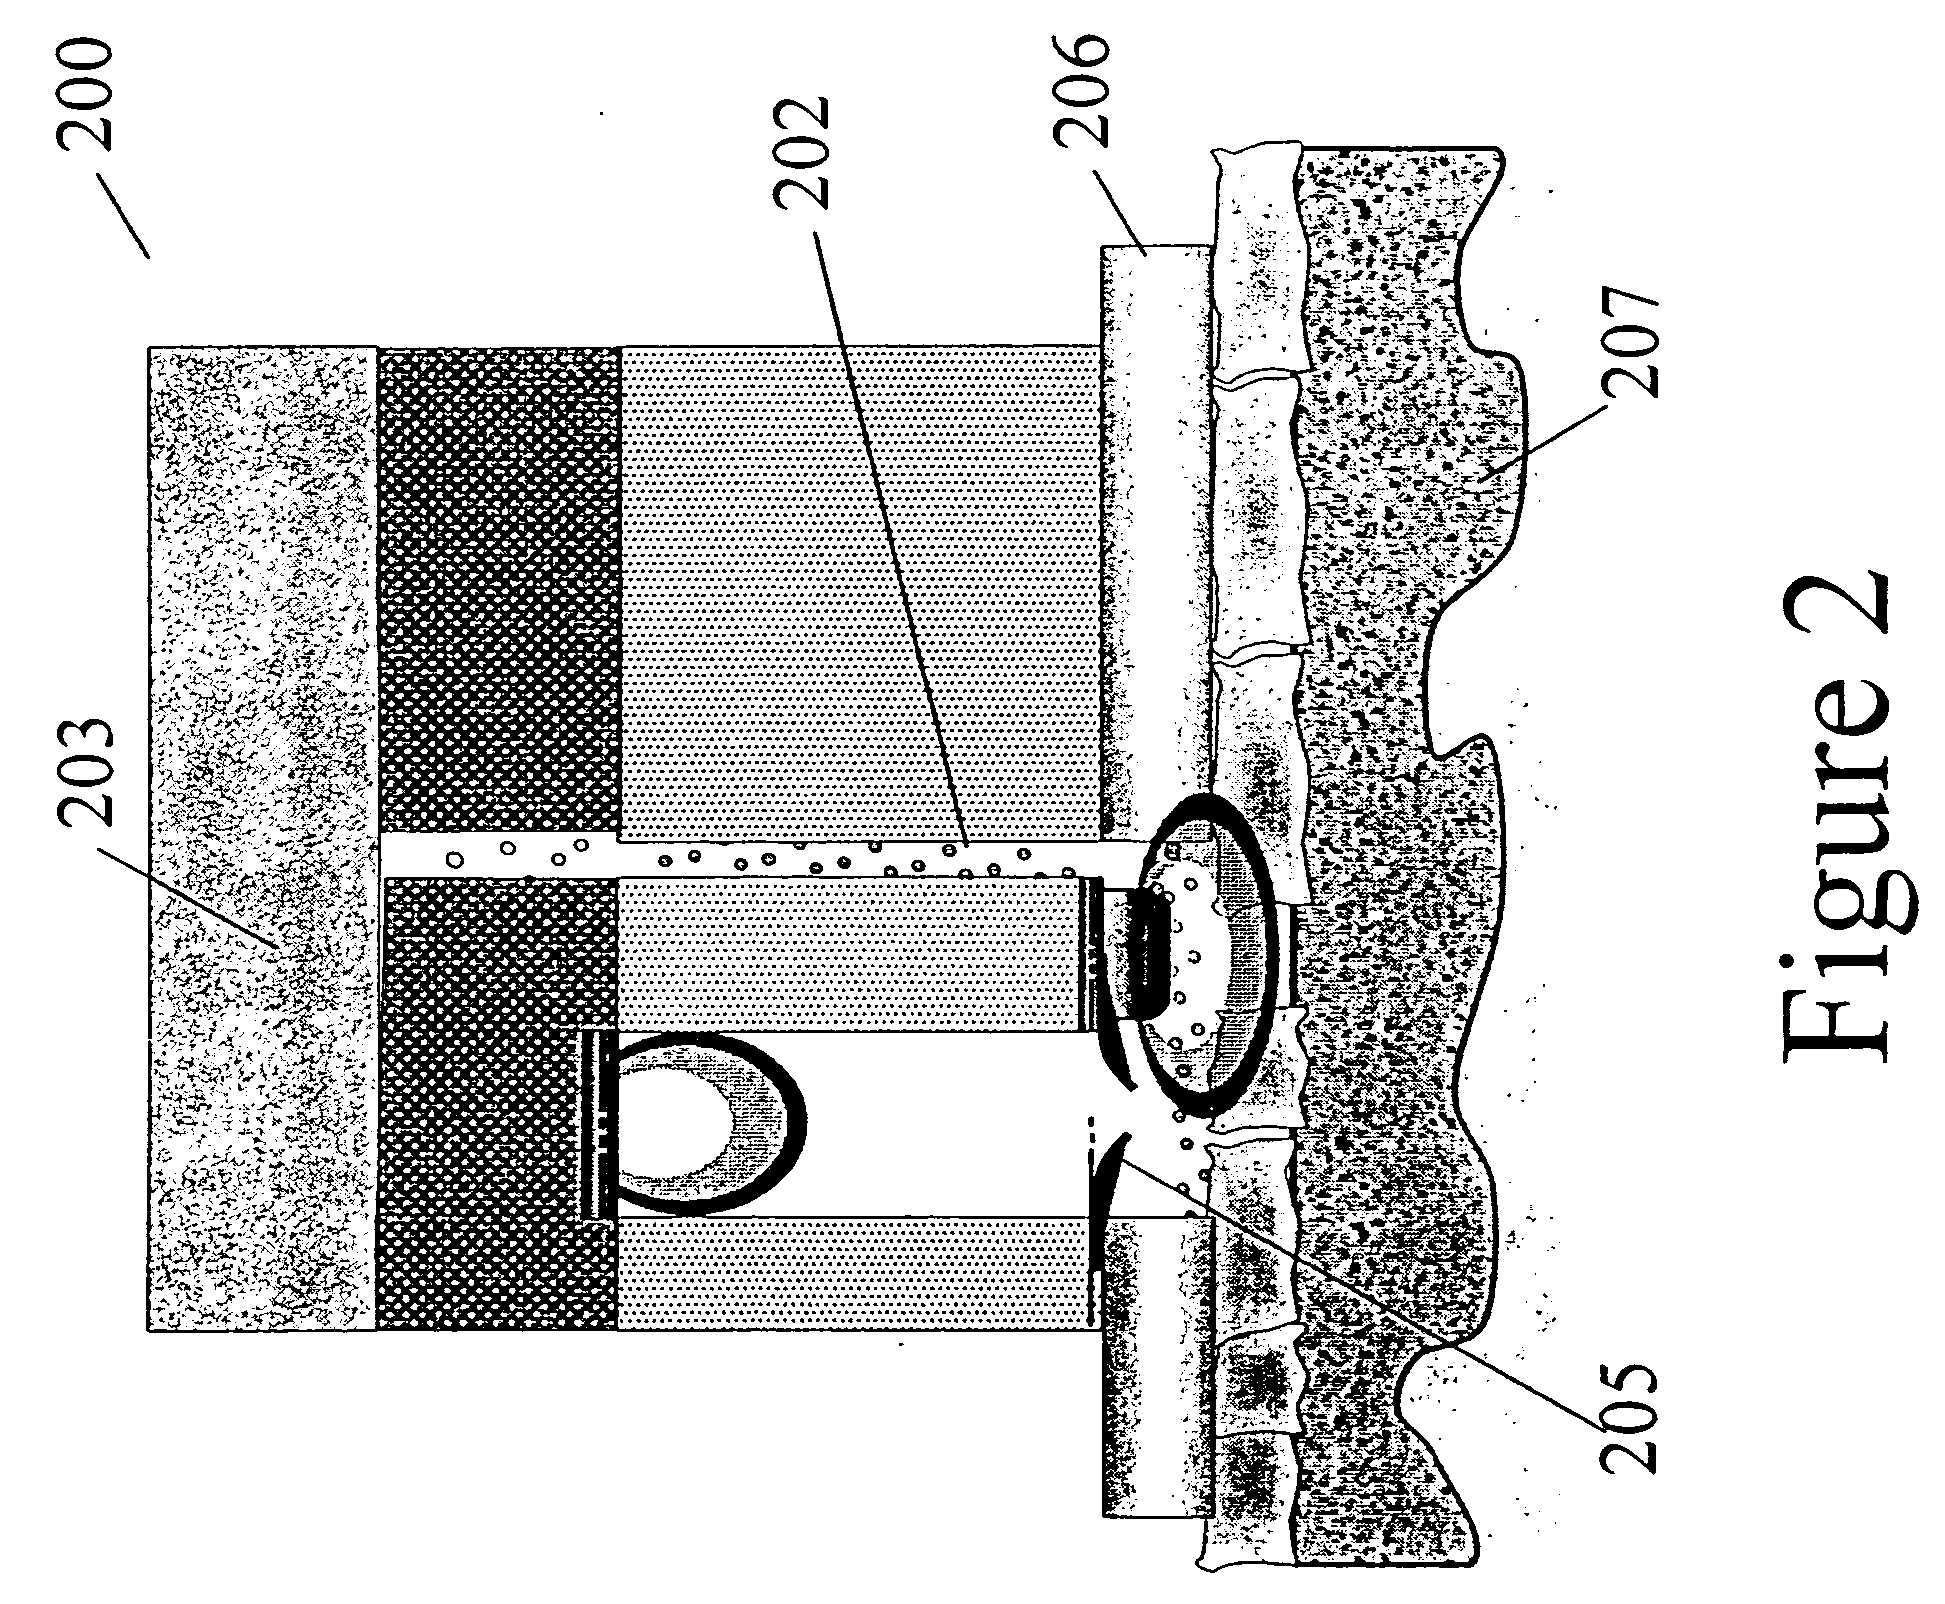 Systems and methods for monitoring health and delivering drugs transdermally